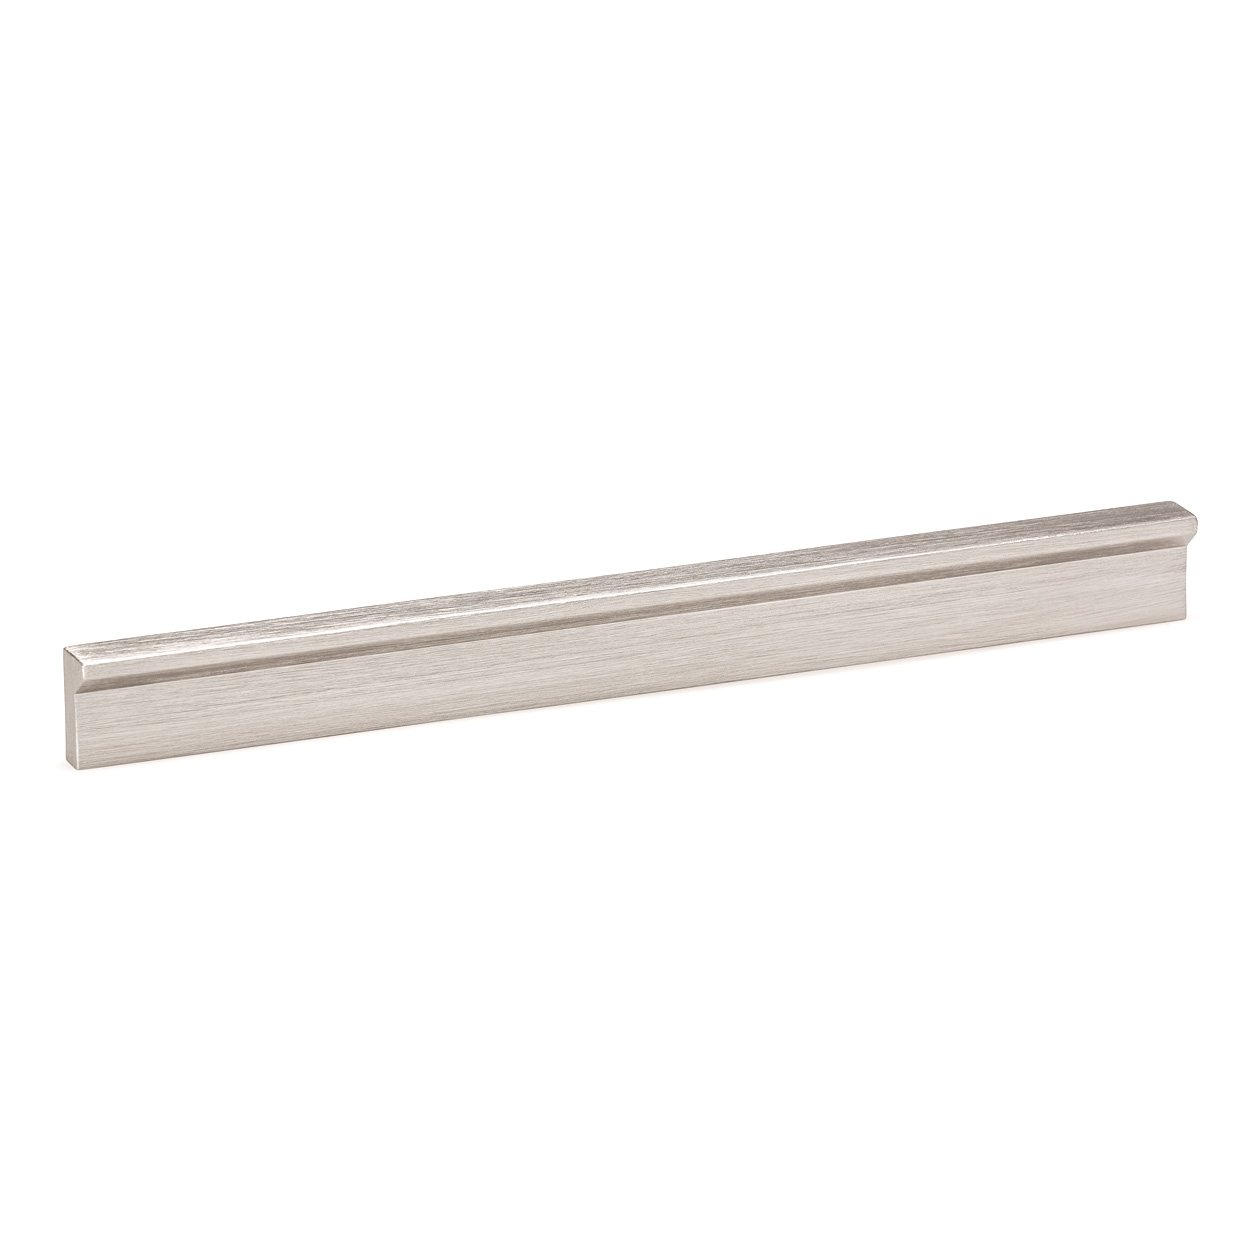 Angle Cabinetry Pull - Dull Brushed Nickel - Flooring Bathrooms Interiors